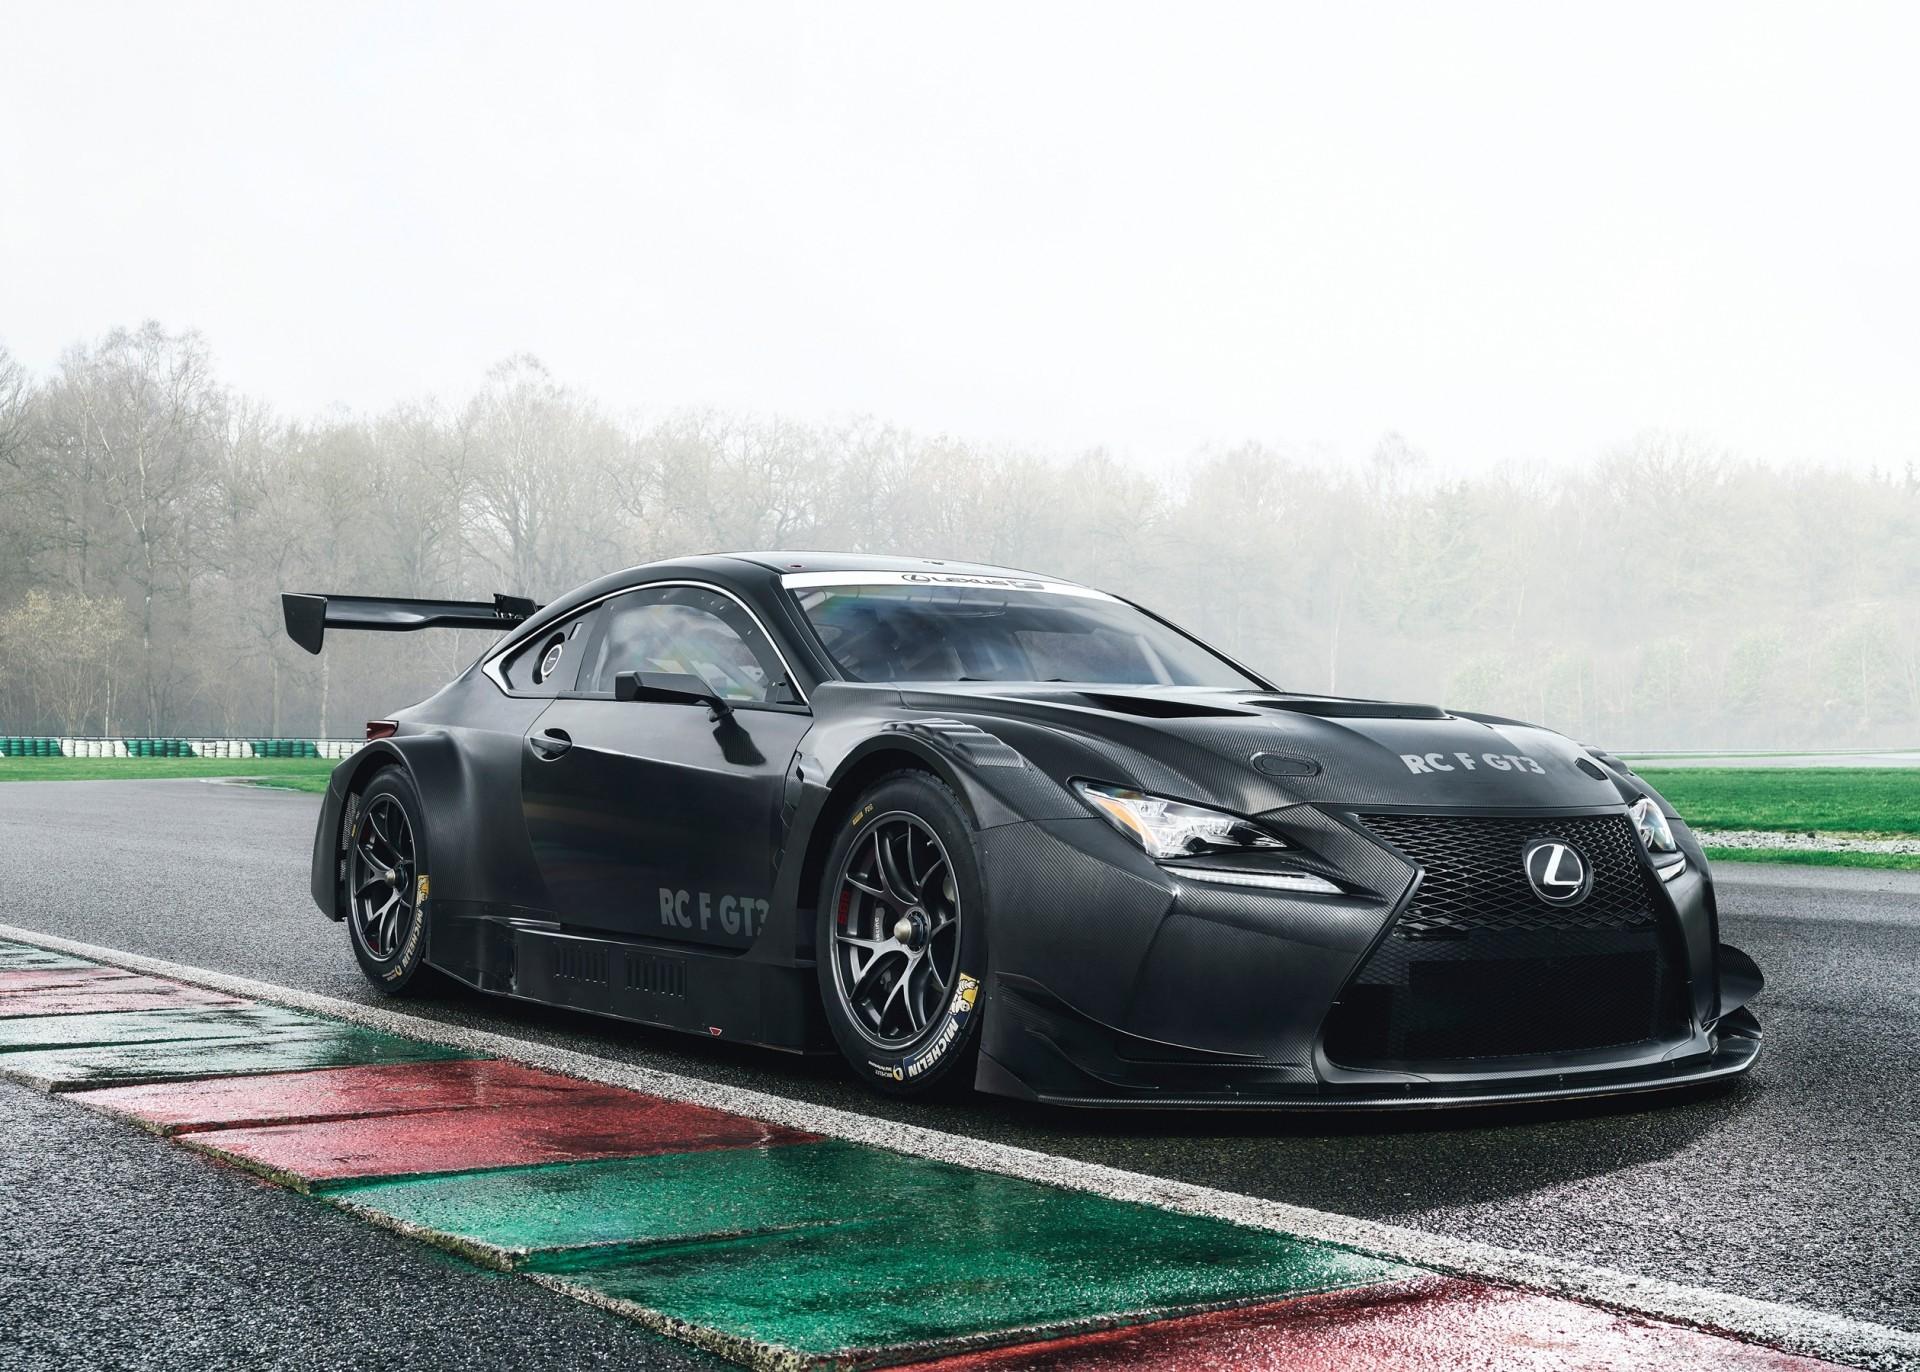 Download 1920x1372 Lexus Rc F Gt Black, Racing, Cars, Side View